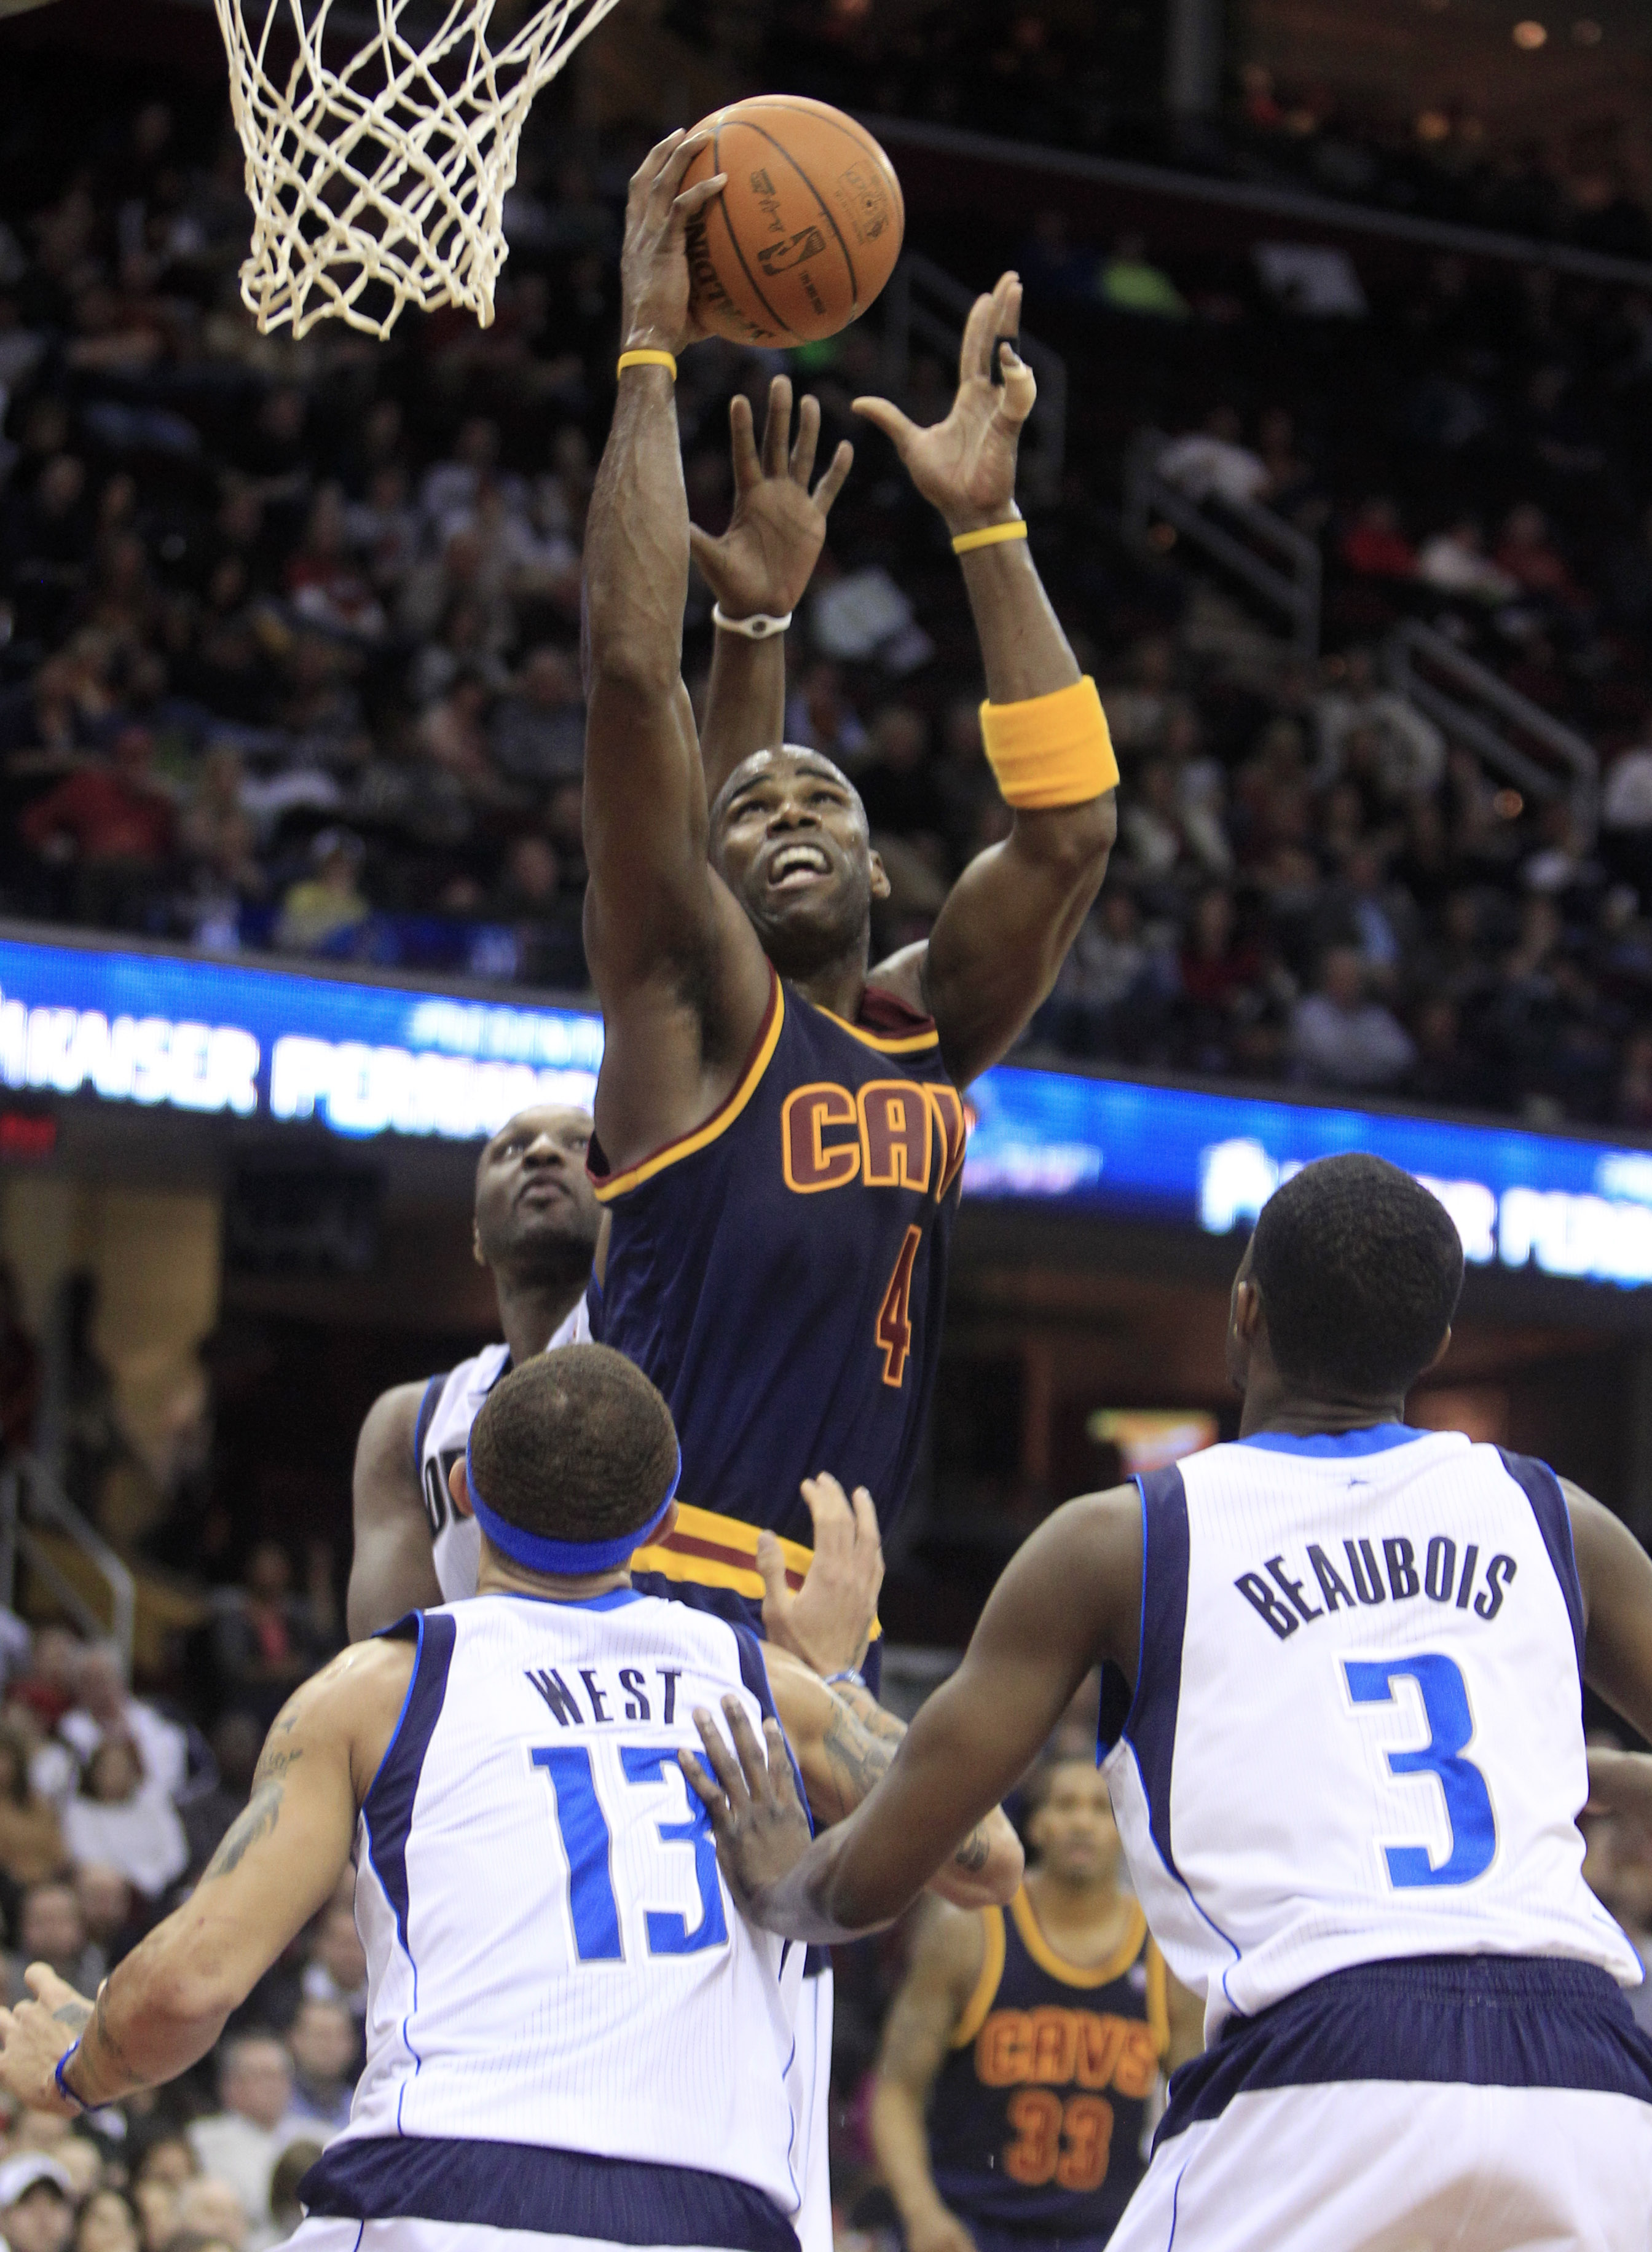 Irving layup seals victory for Cavaliers - The Blade